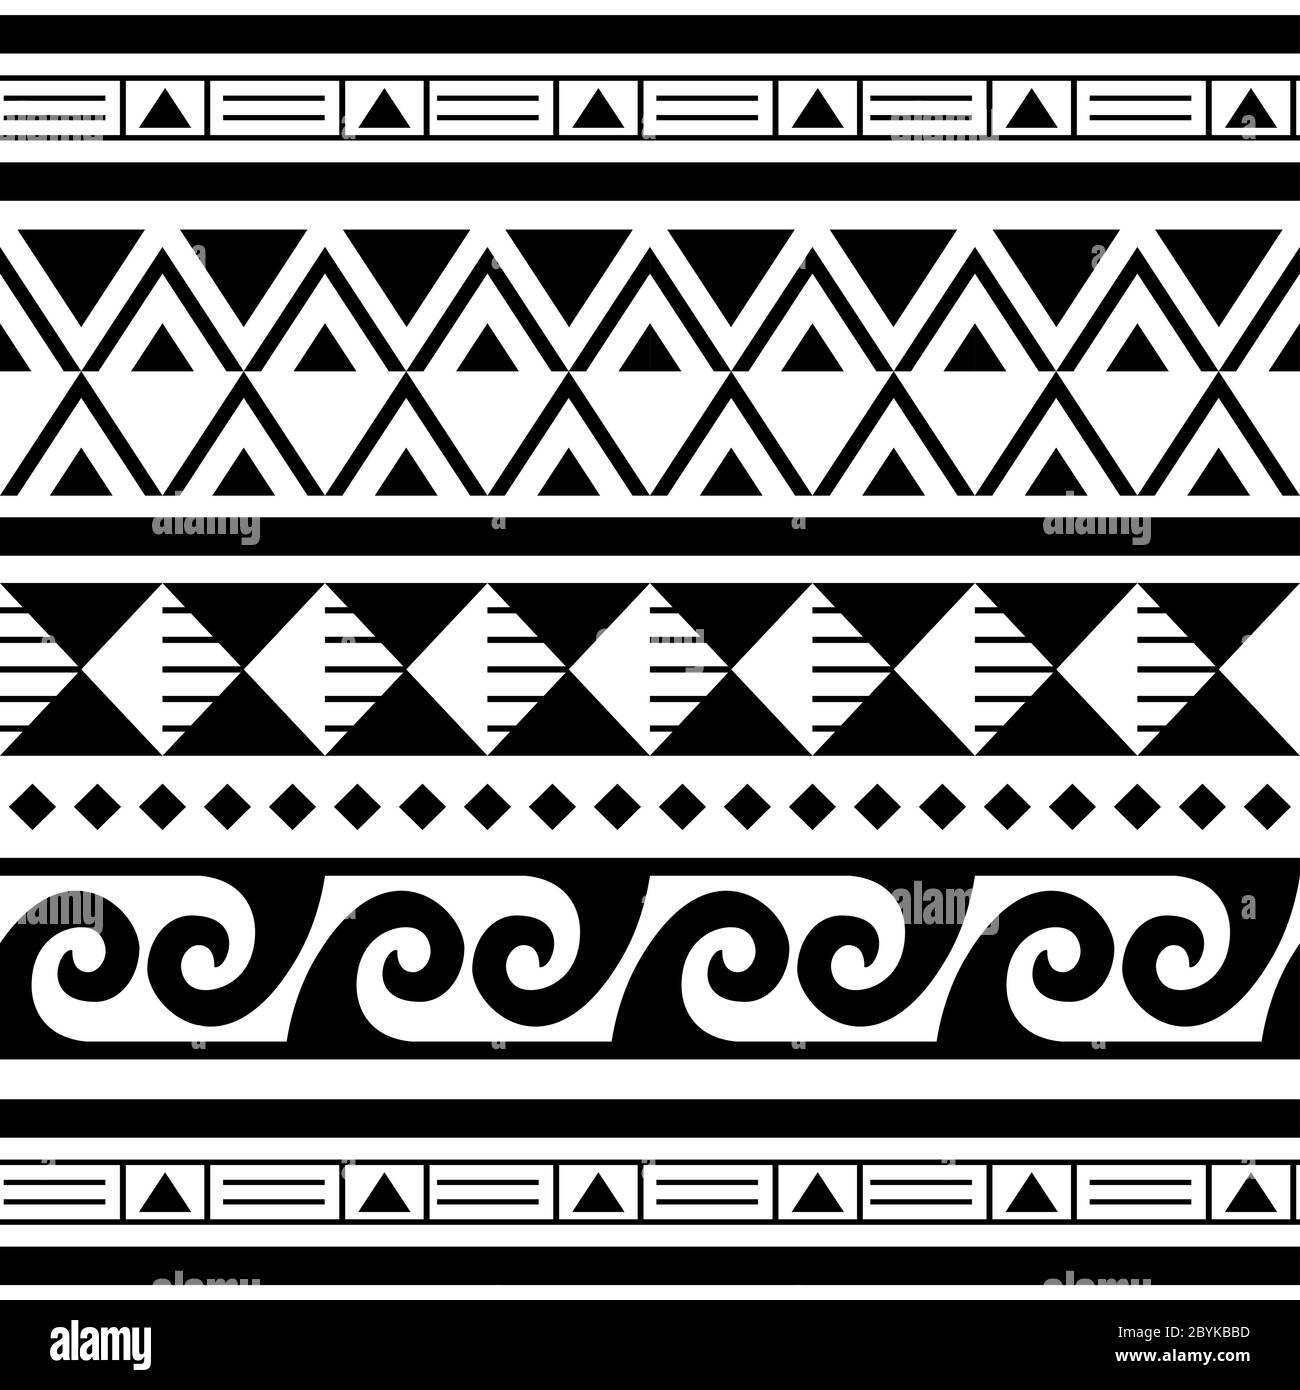 Polynesian Tattoo Wrist Sleeve Tribal Pattern Forearm. Ethnic Template  Ornaments Vector. Royalty Free SVG, Cliparts, Vectors, and Stock  Illustration. Image 163738463.